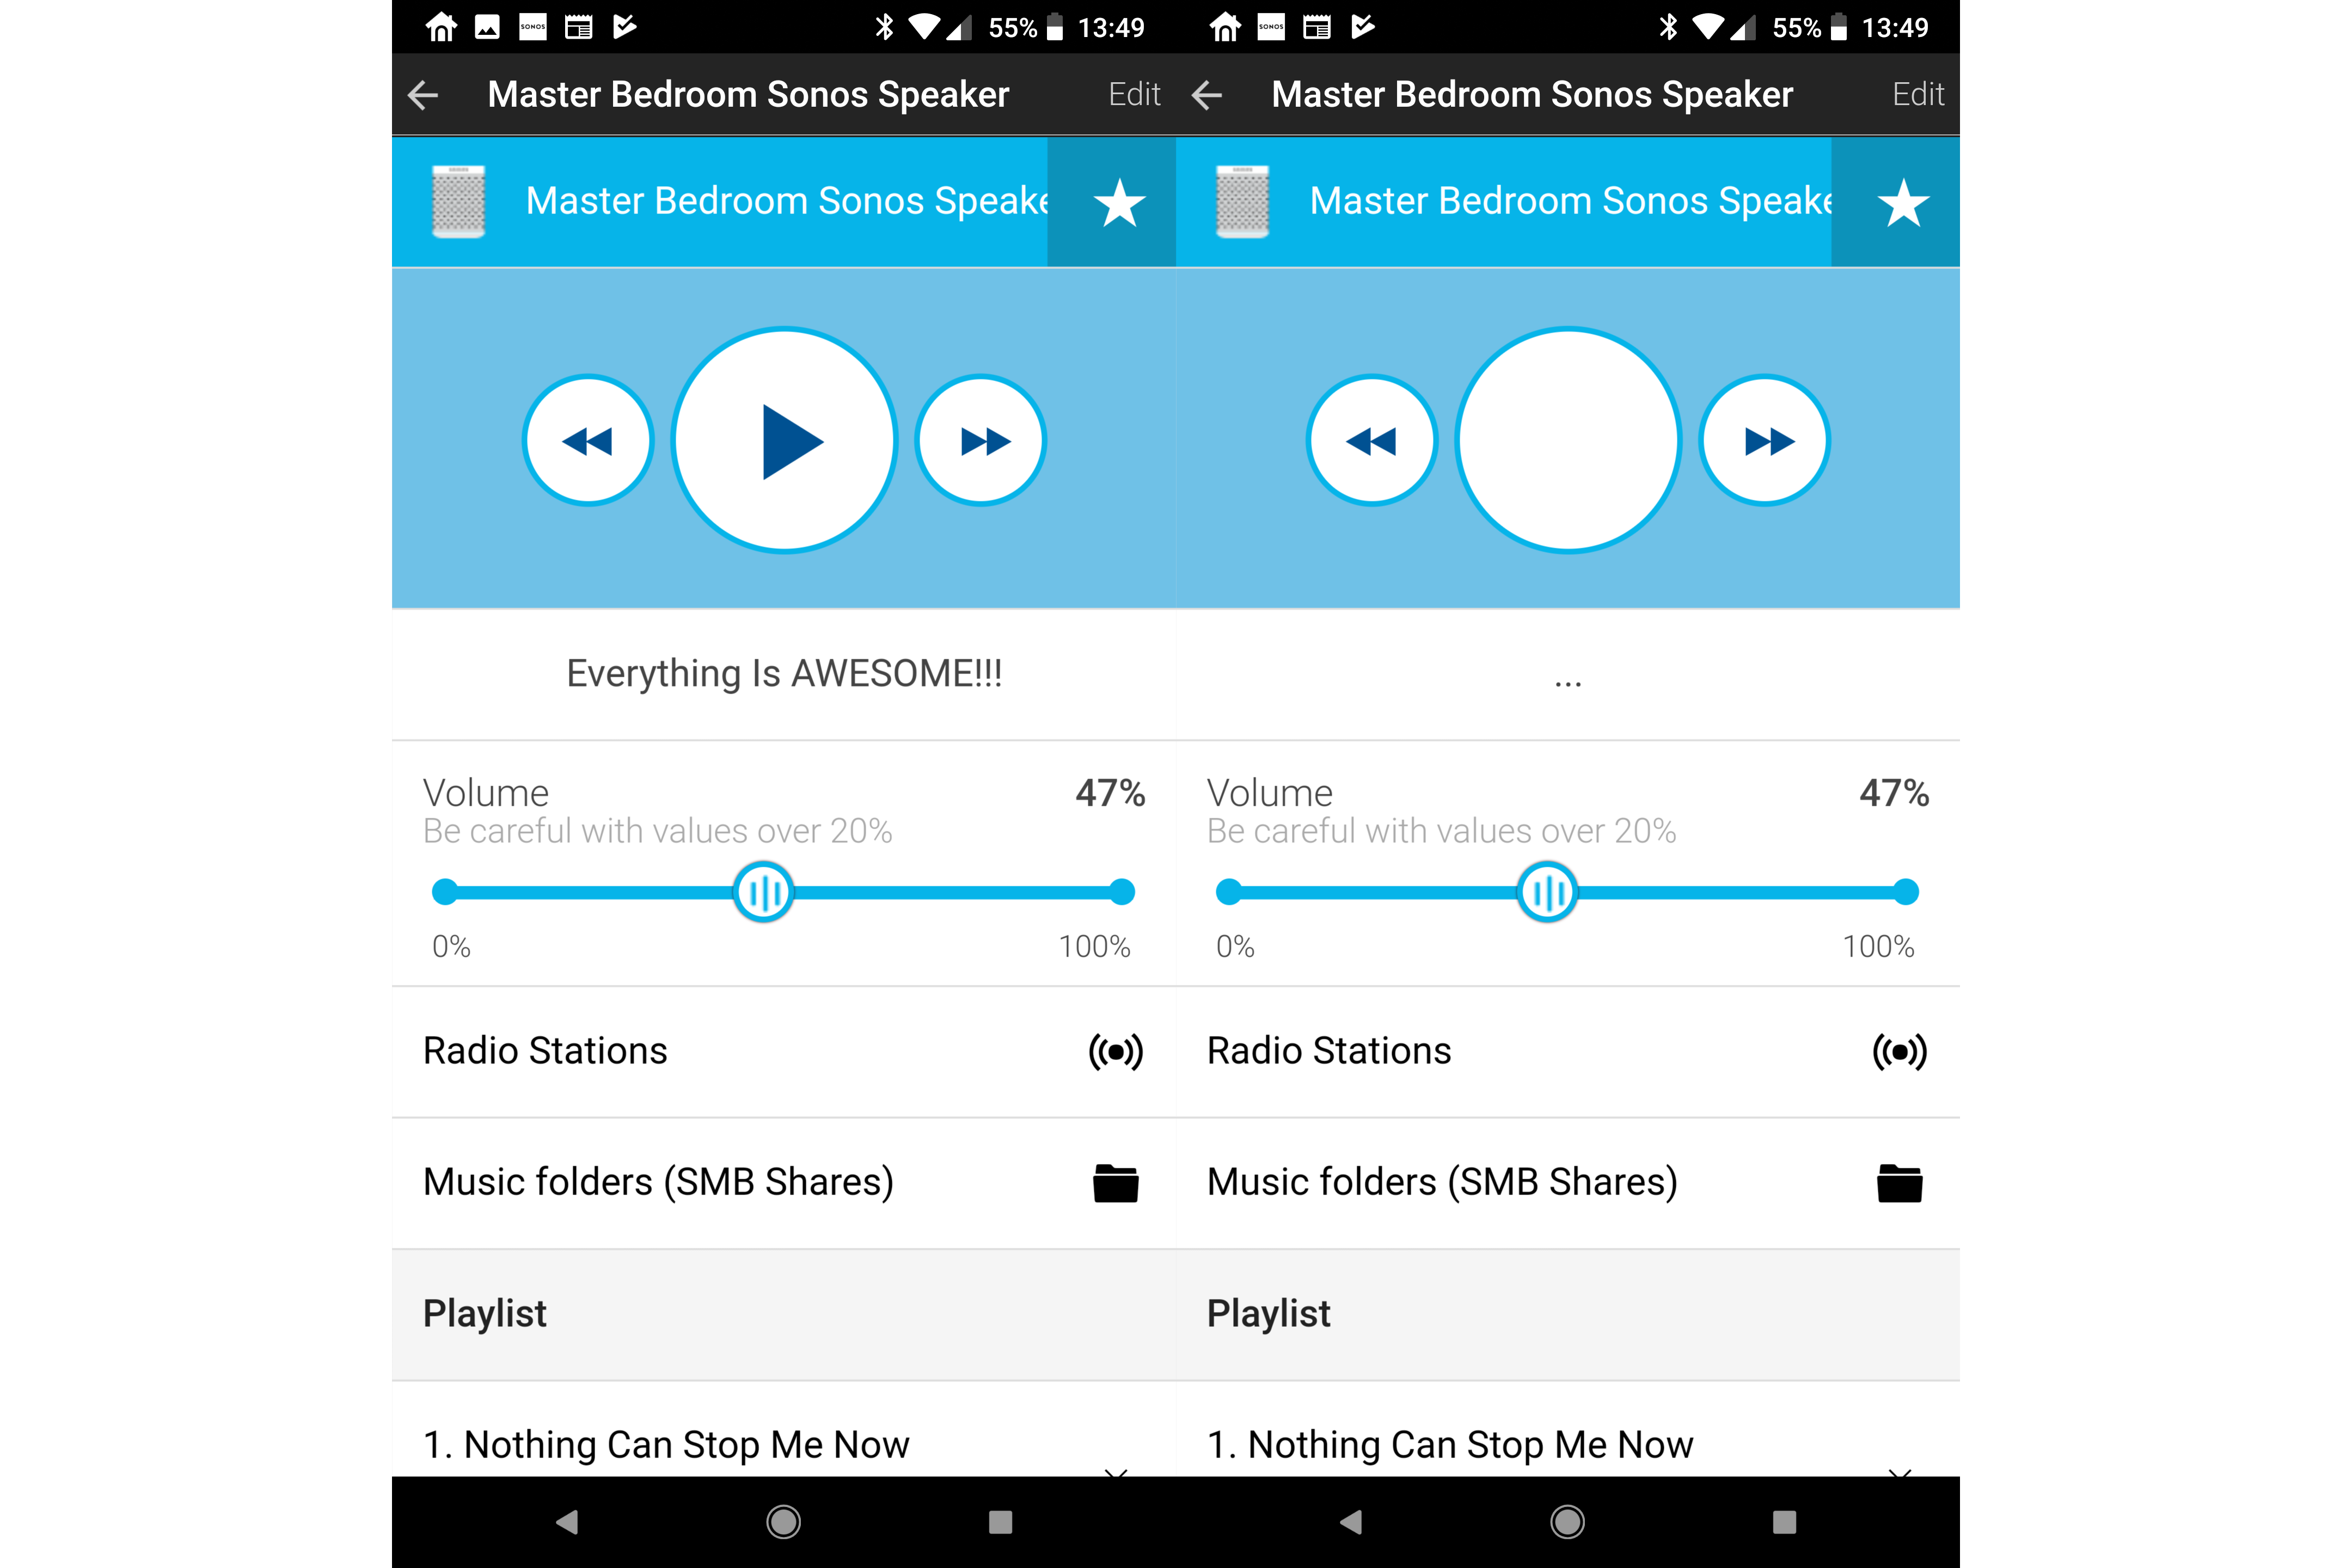 Screenshot of nCube Home app interface showing volume control and playlists.